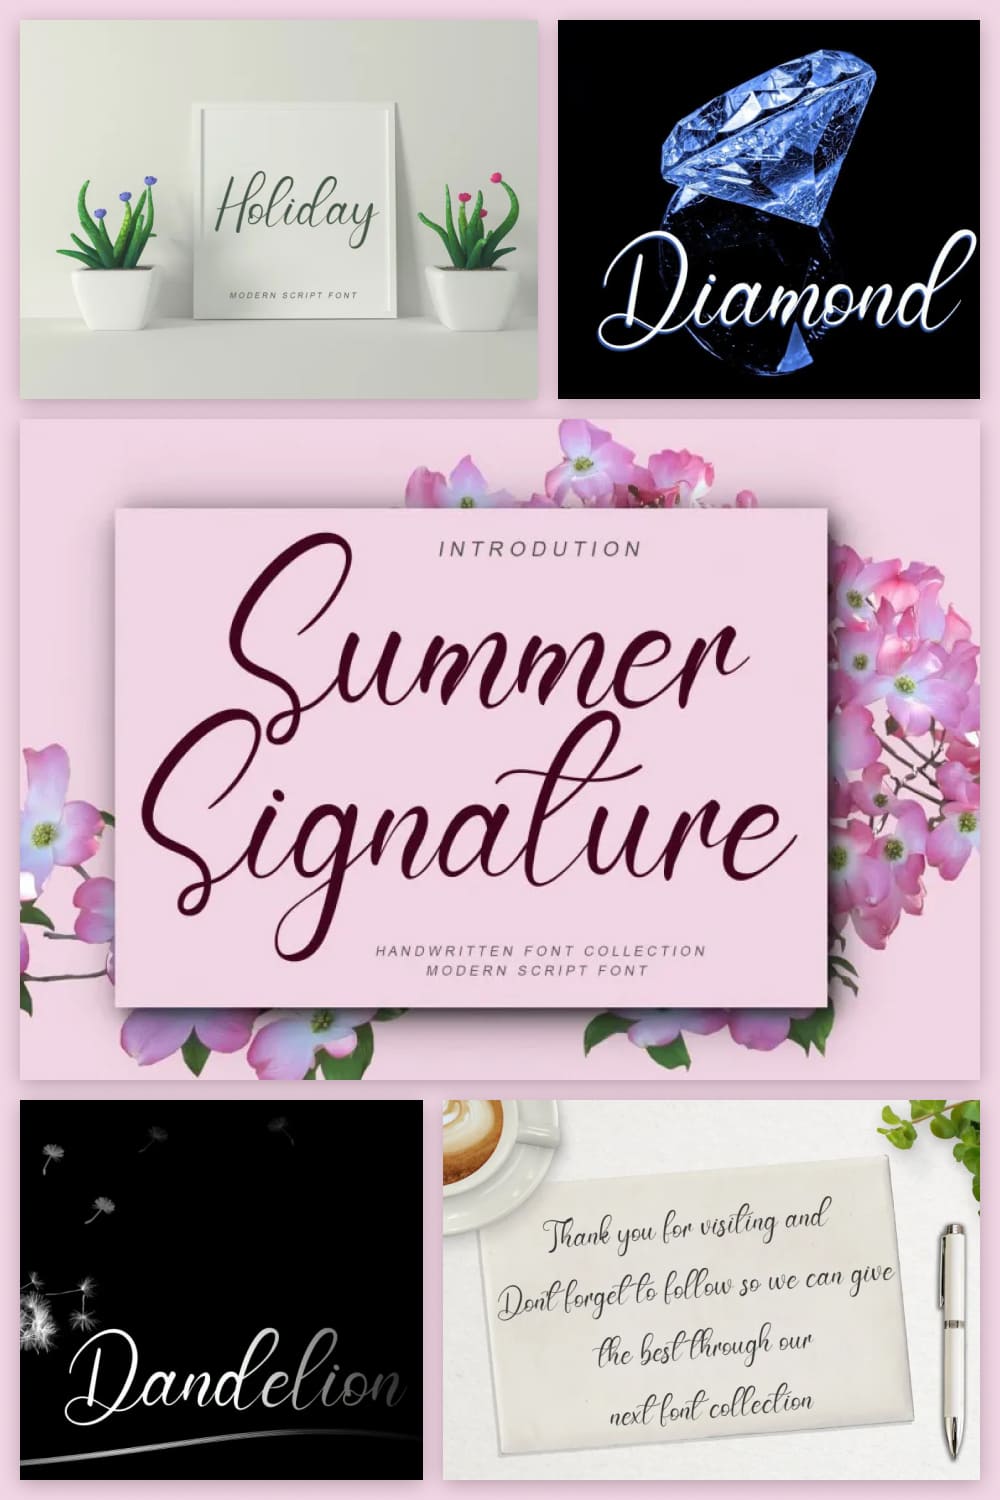 This is a dainty and elegant handwritten font.